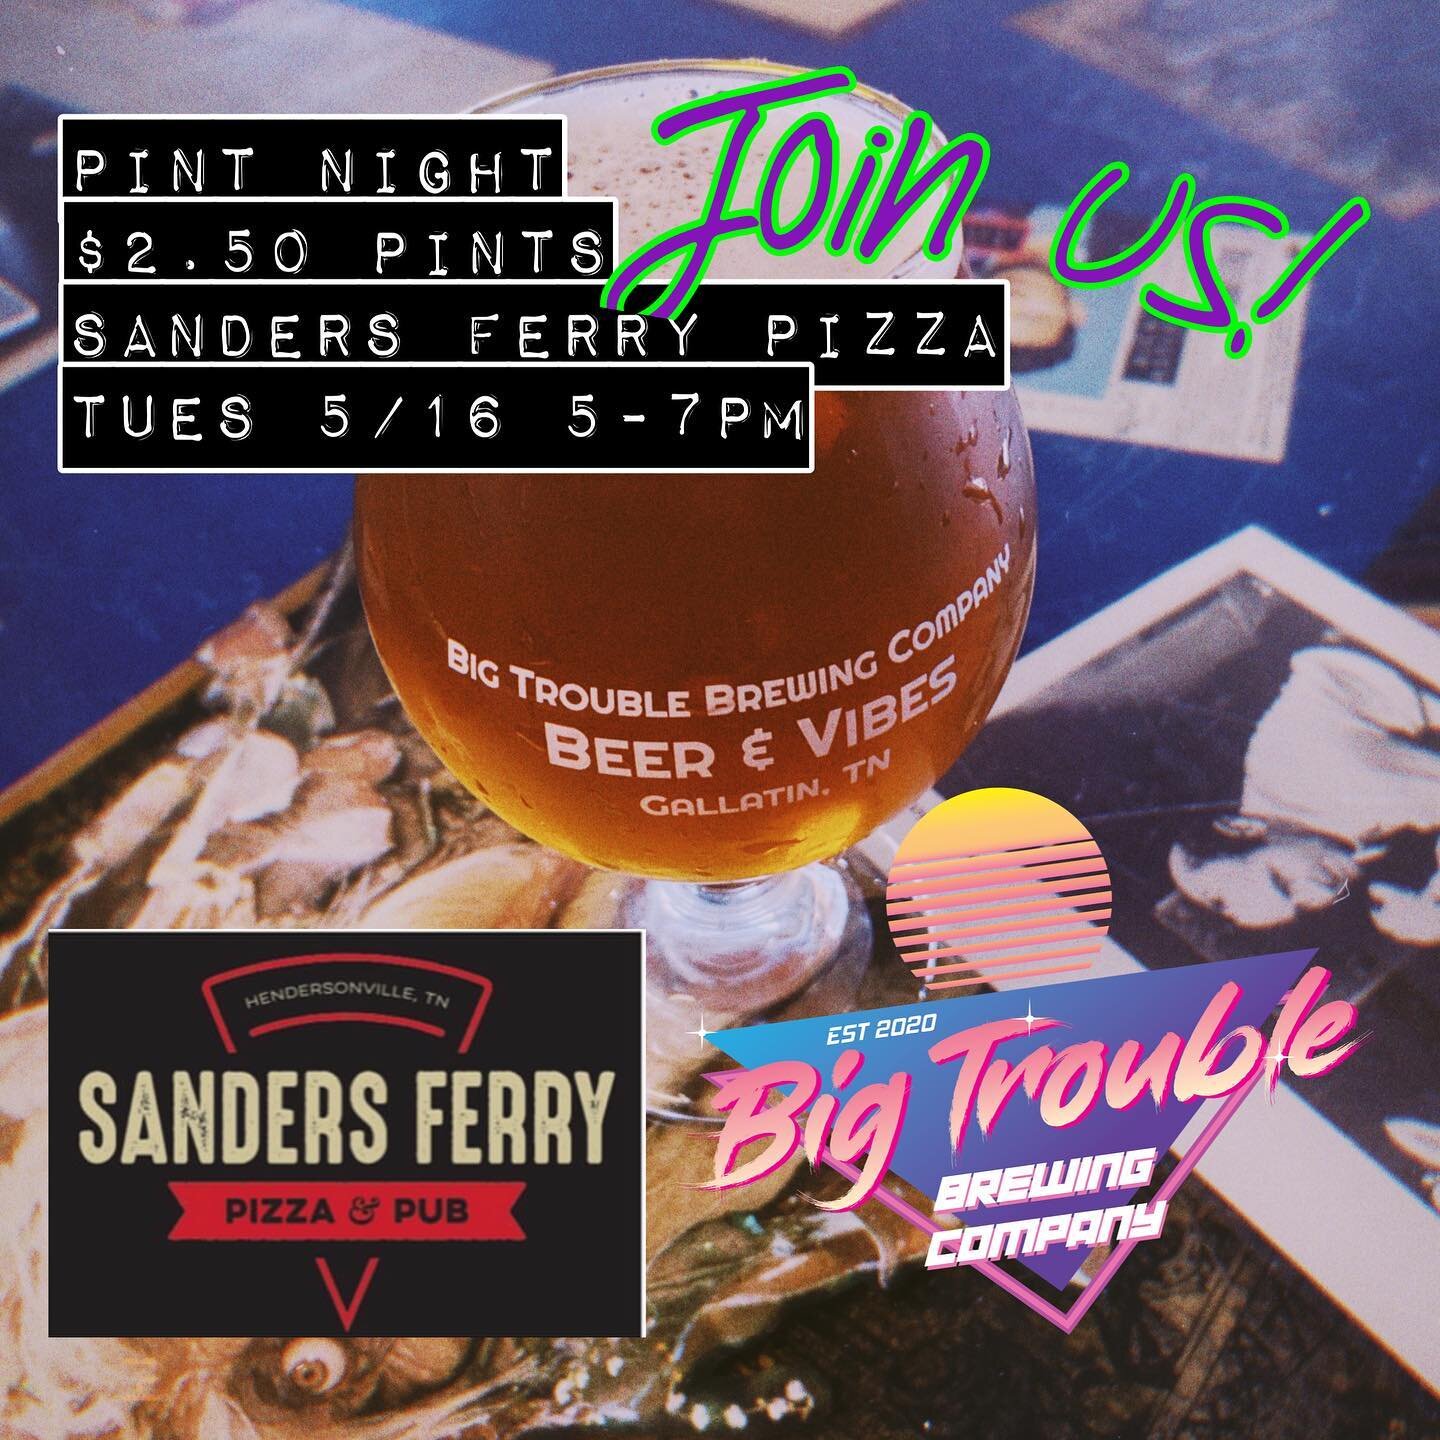 Pizza and nectar of the gods. No better pairing! Join us tonight @sandersferrypizza. We will have 4 beers on tap for 2.50!